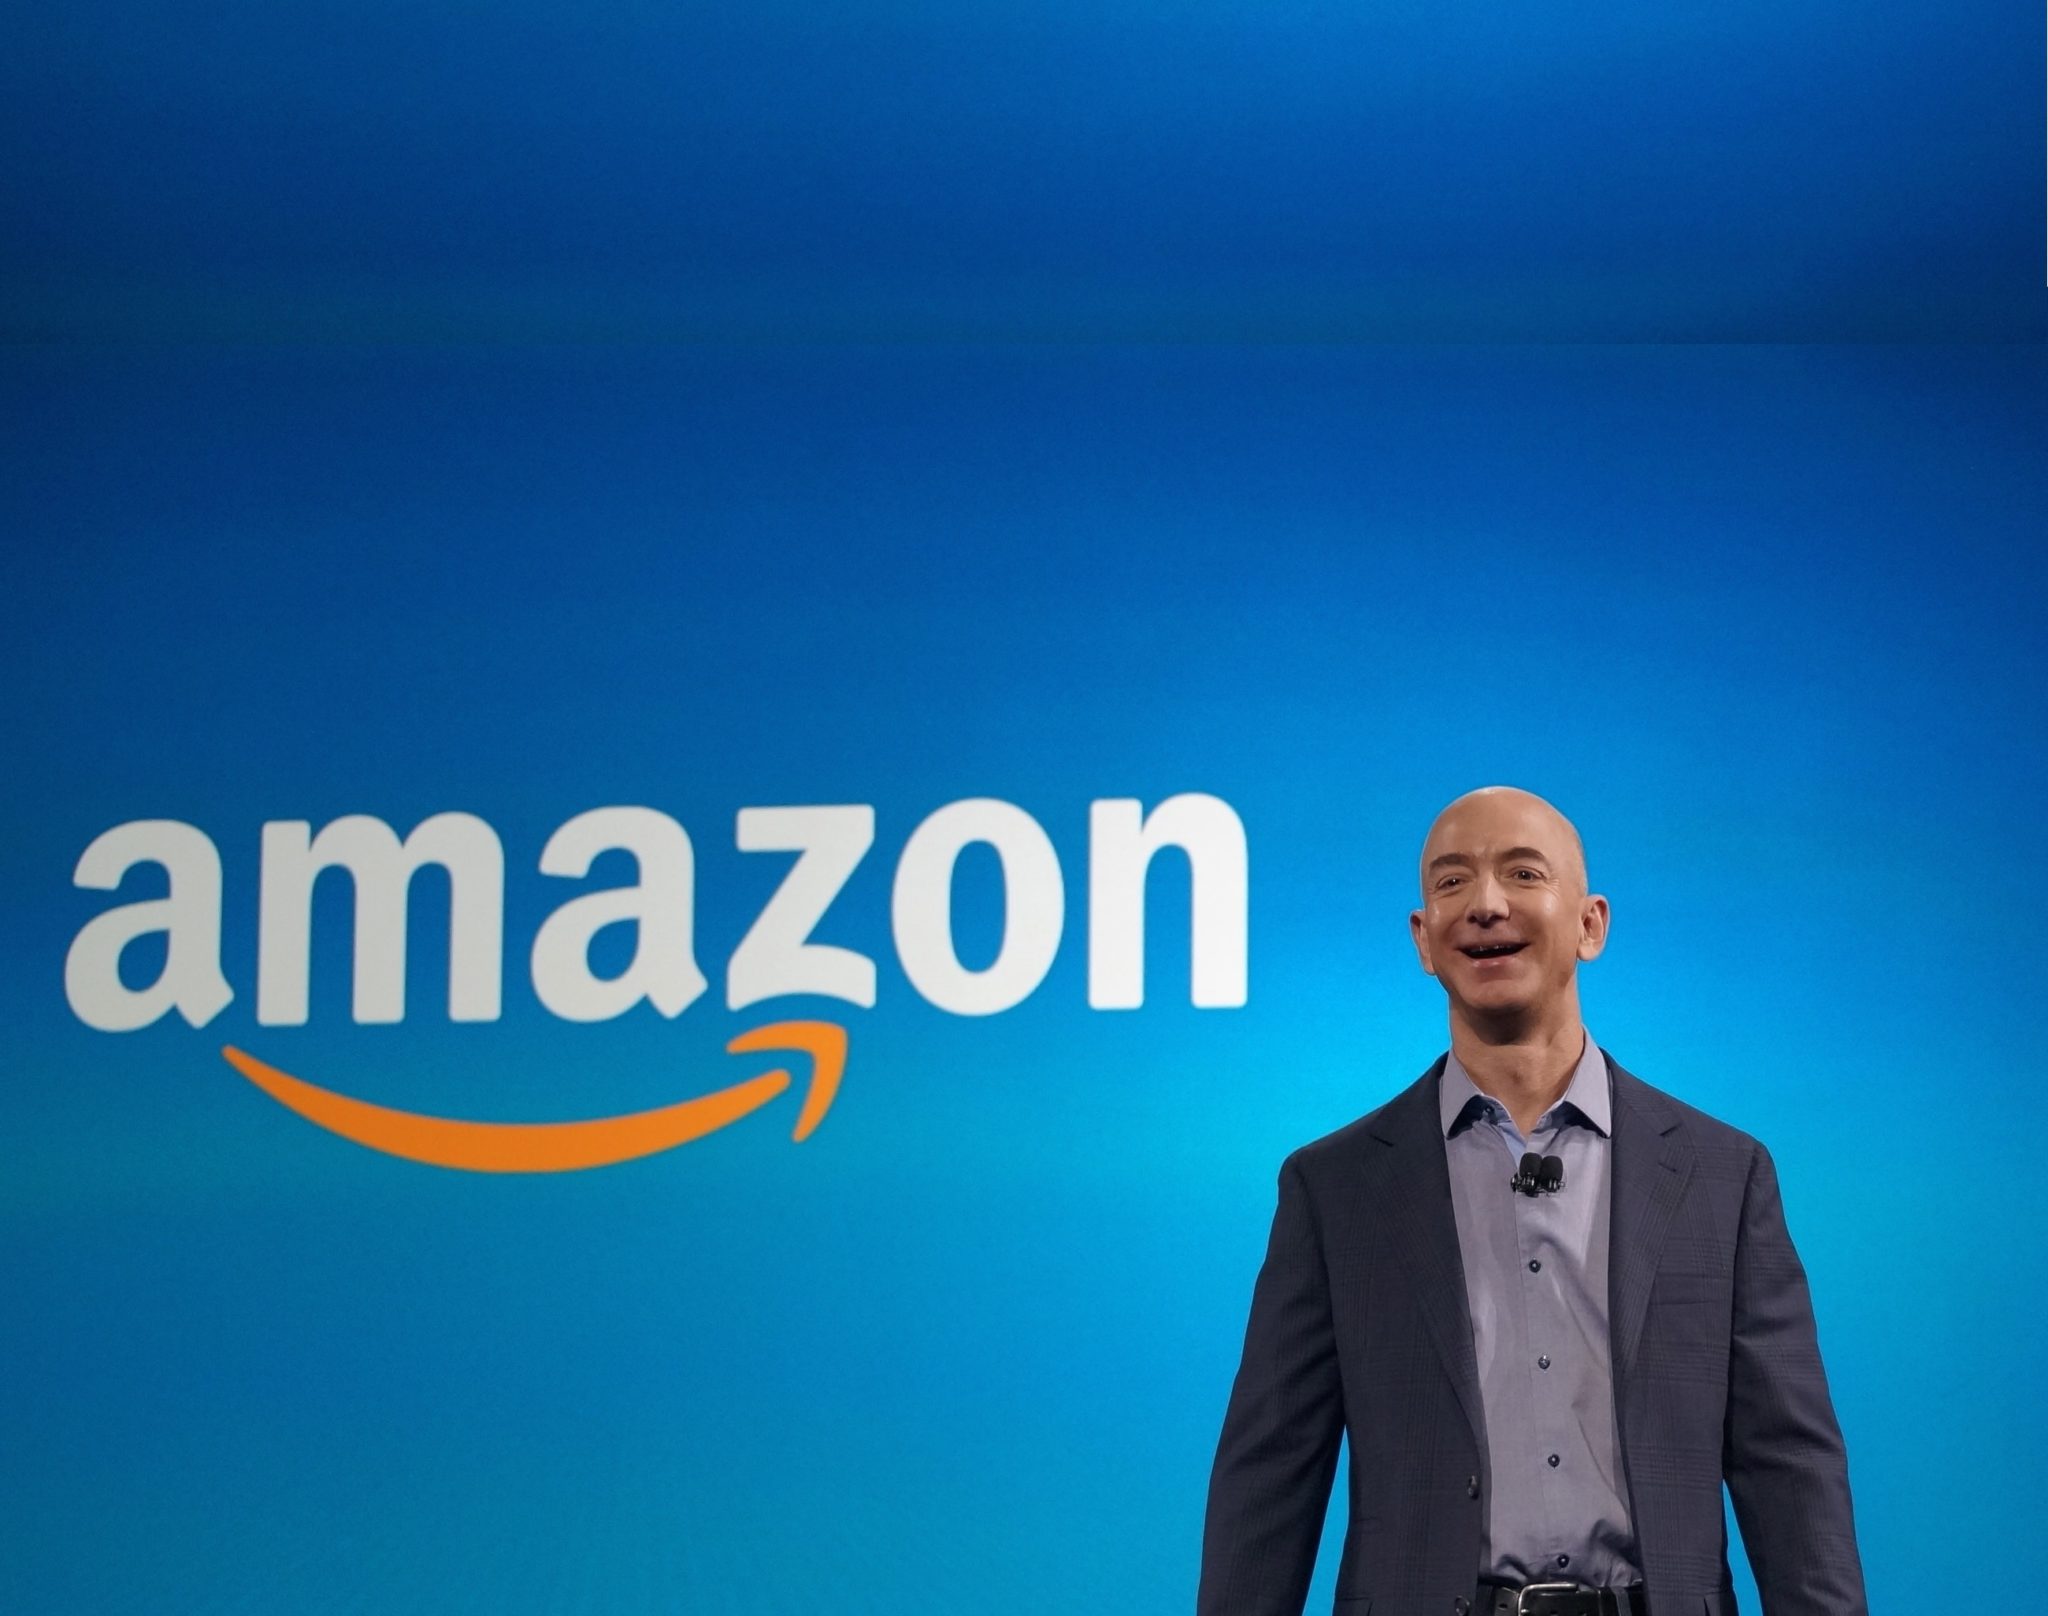 Amazon boss Jeff Bezos has big plans for the industry...if only we knew what they were